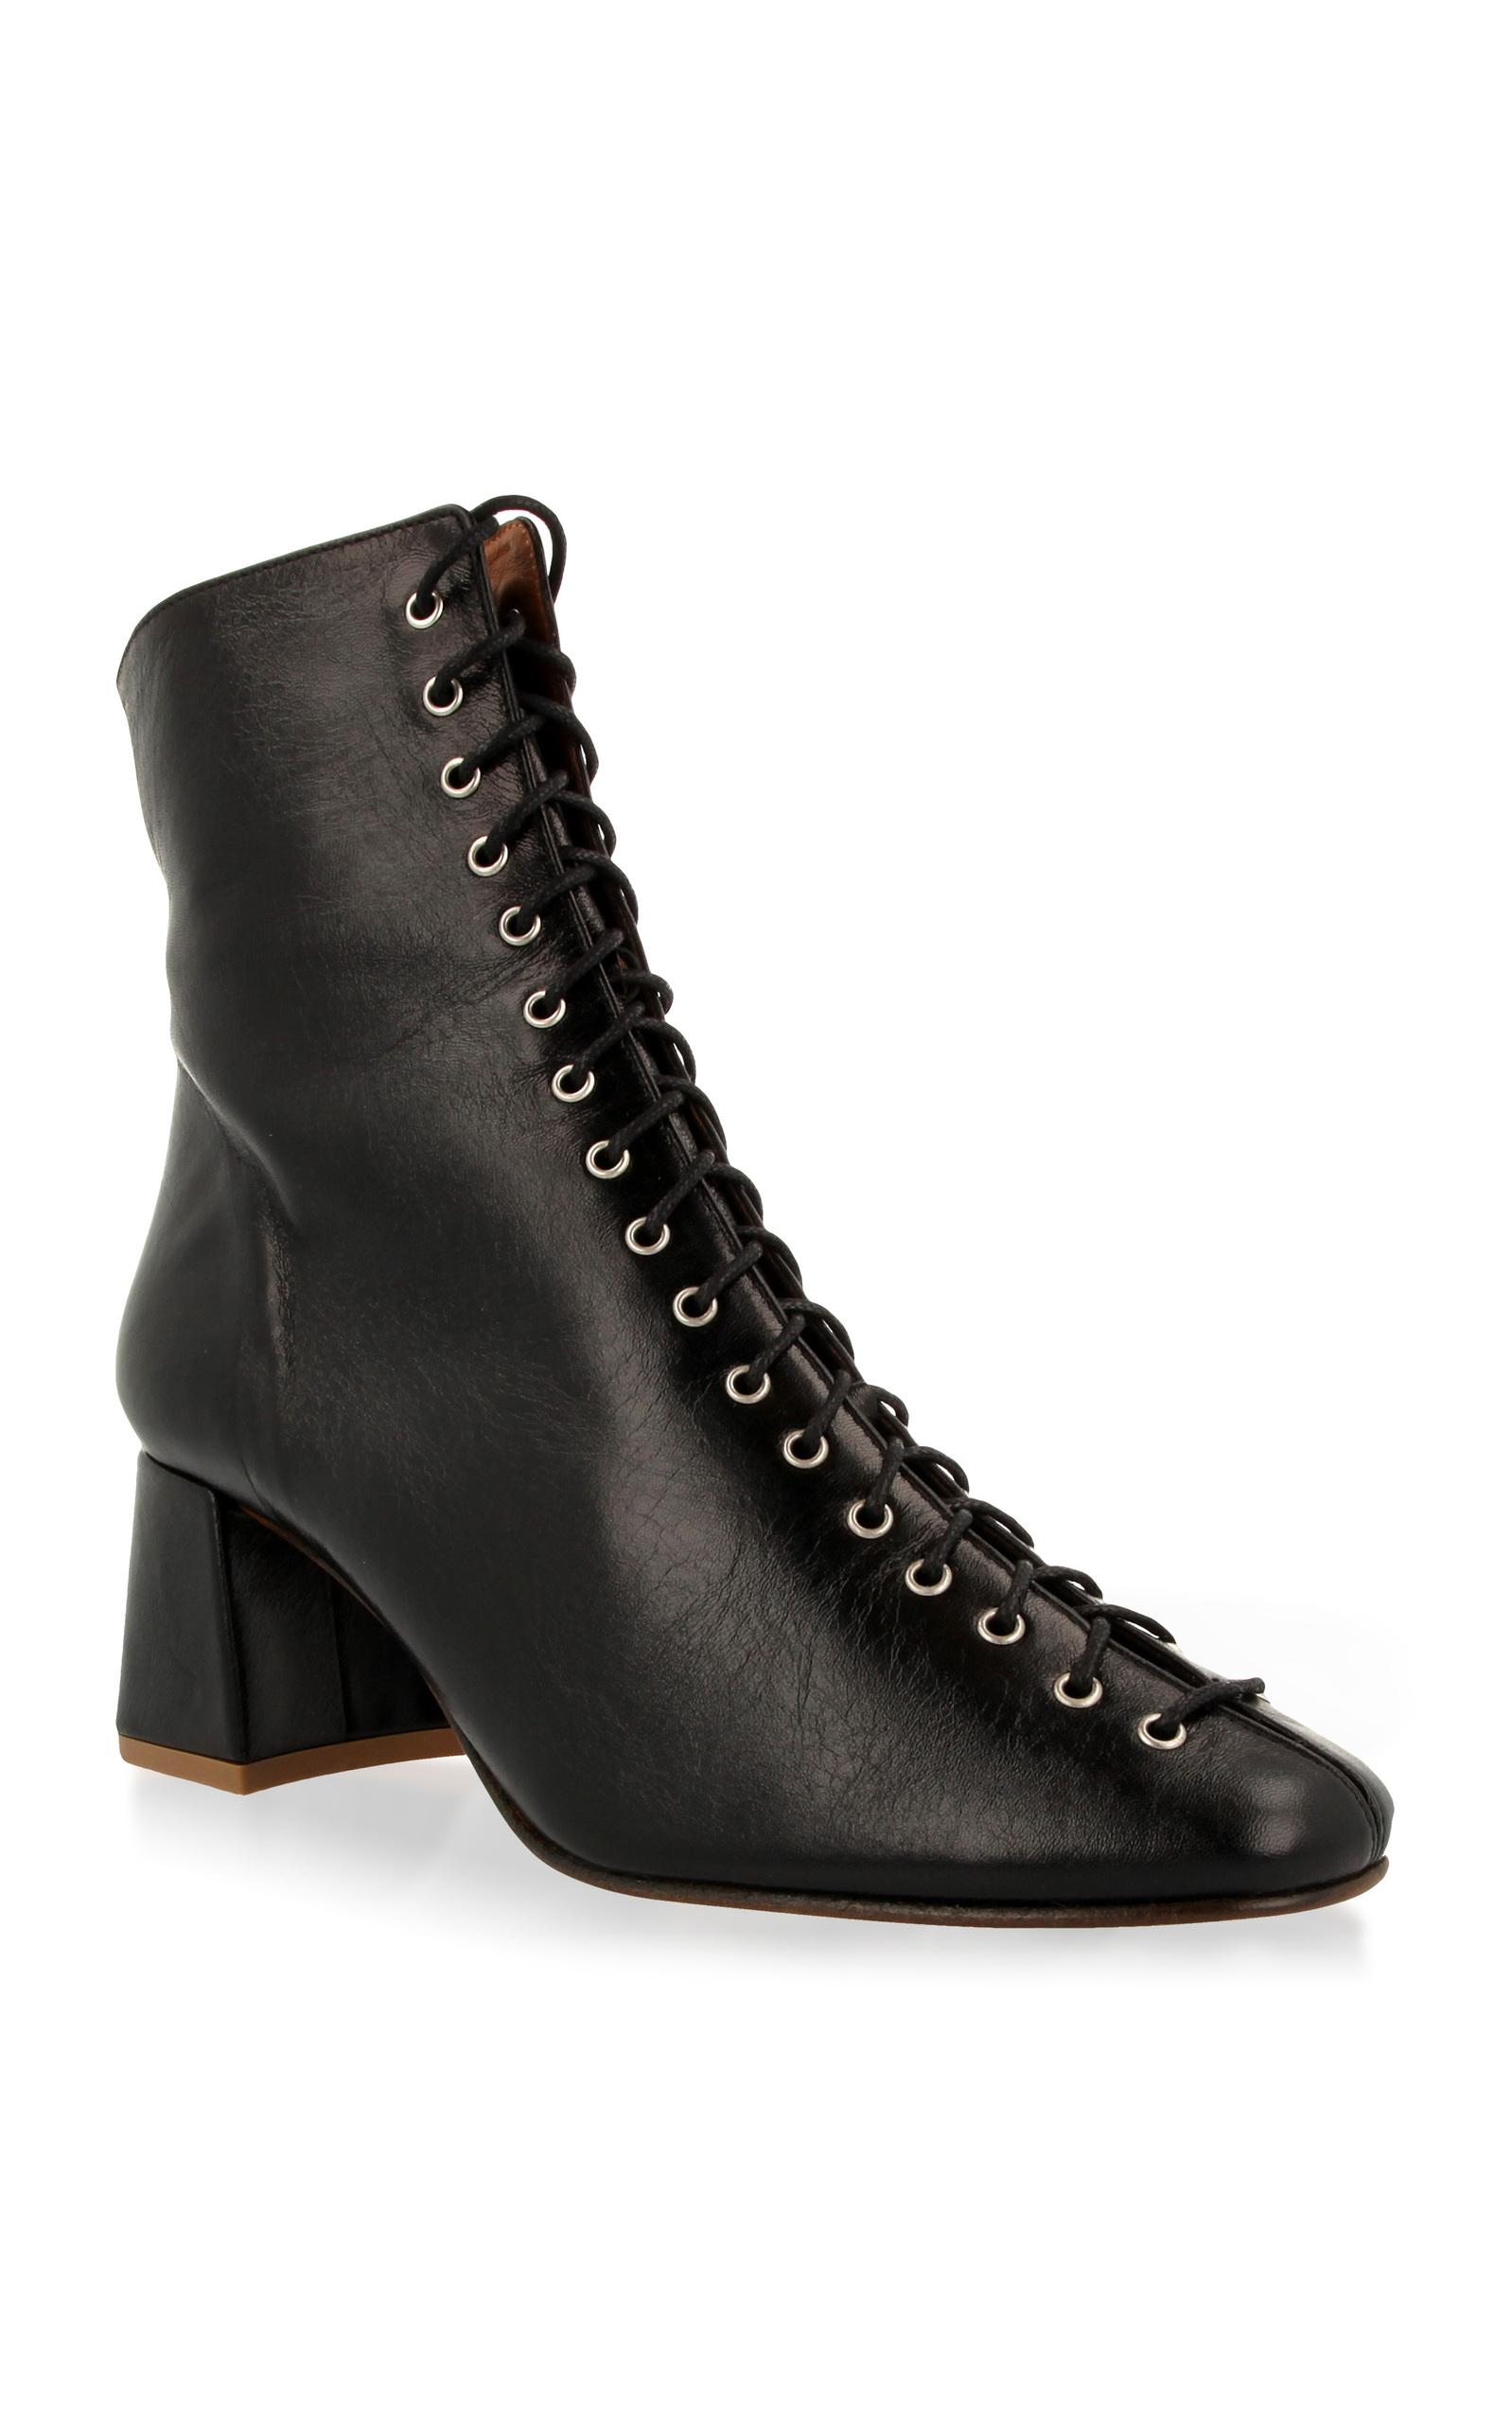 Lyst - By Far Becca Lace Up Leather Boot in Black